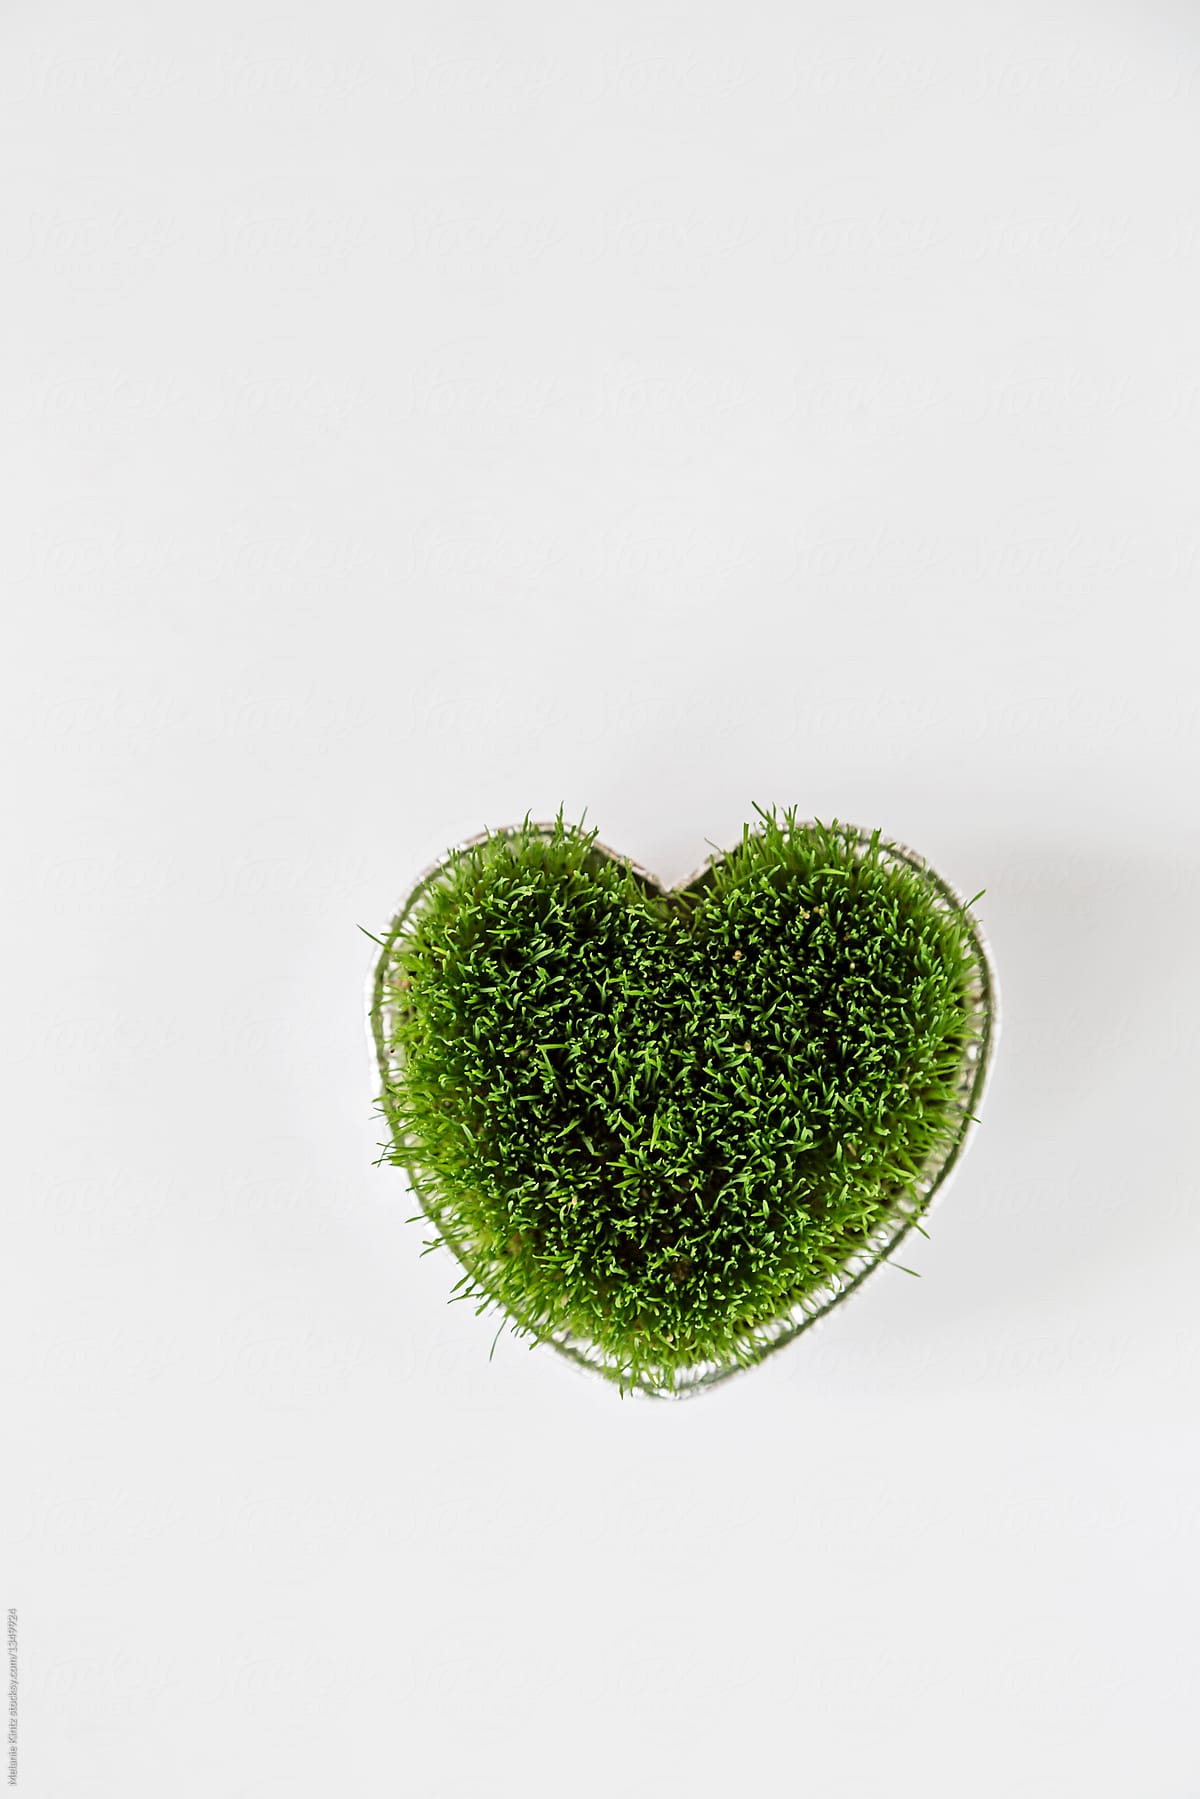 Heart of grass on white background